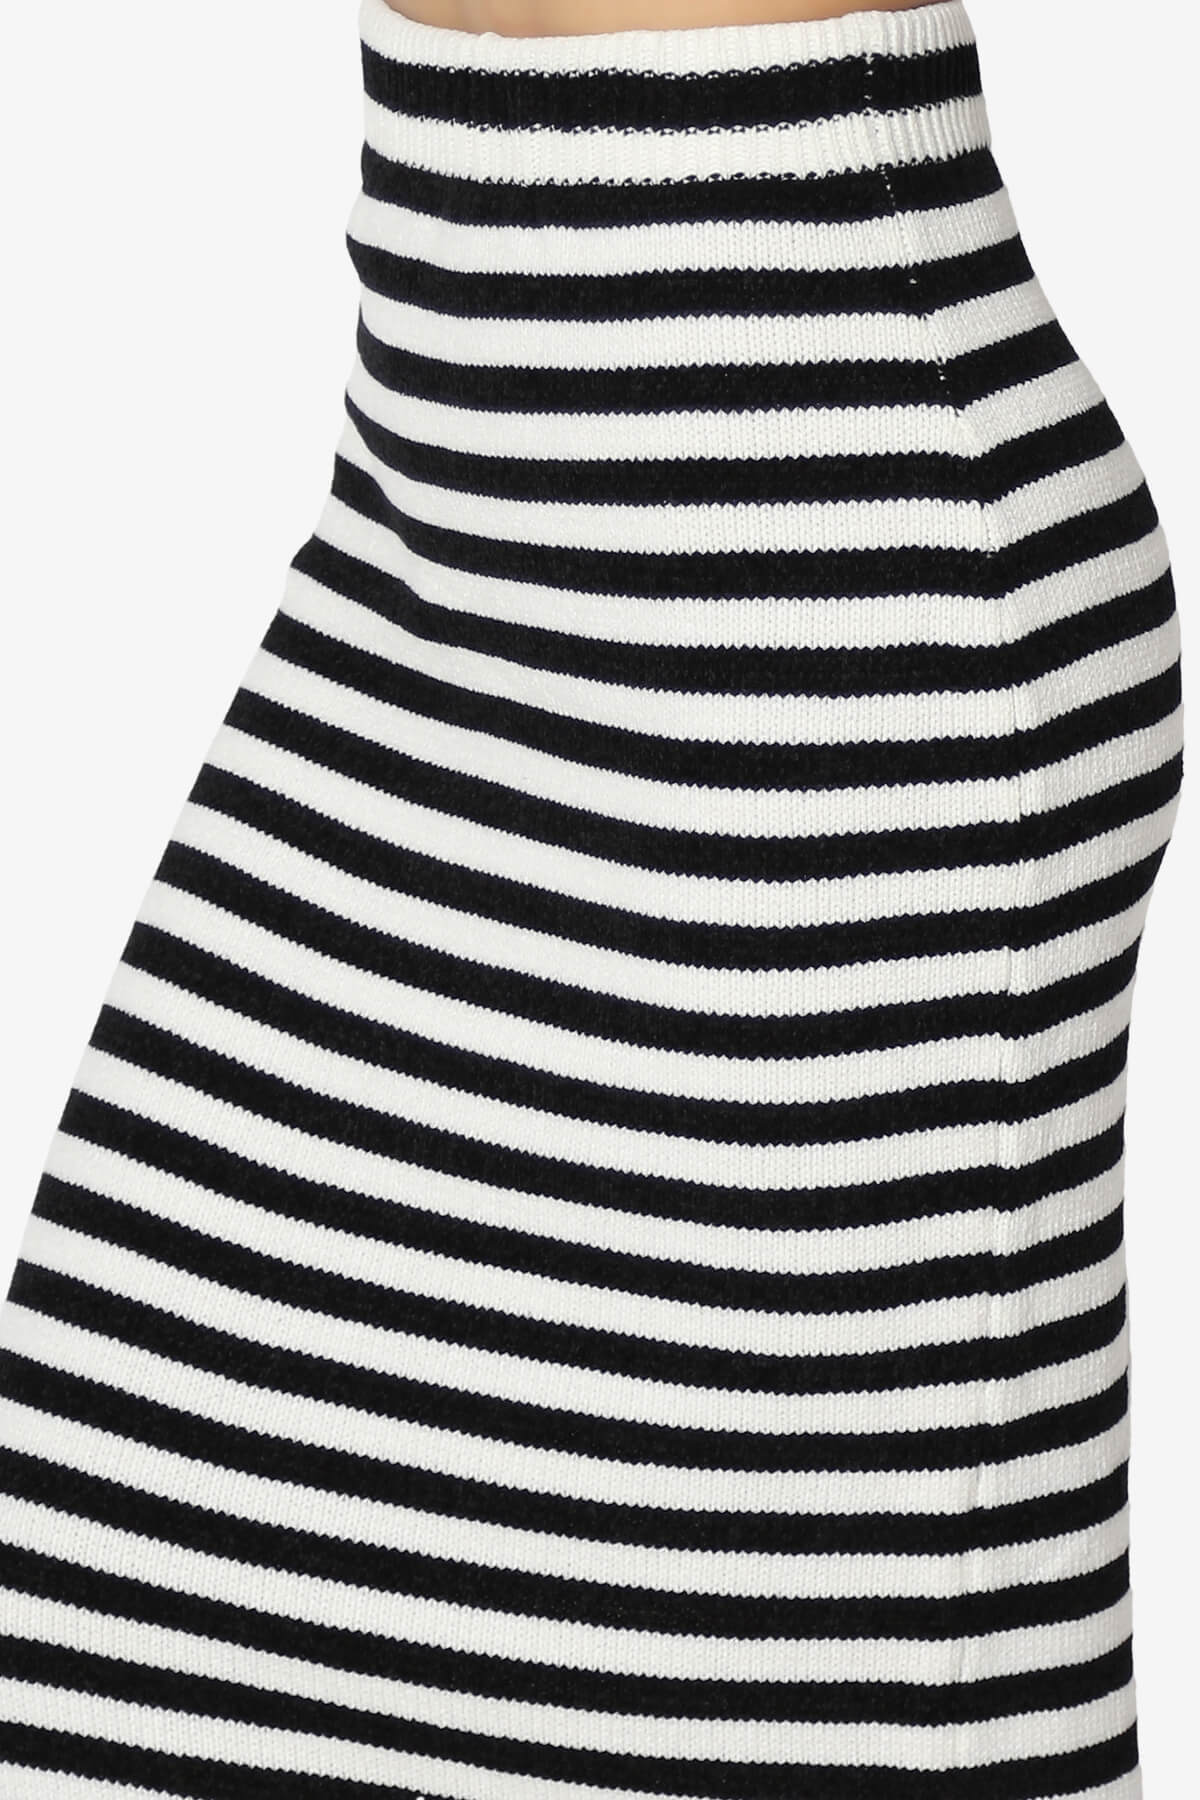 Mona Striped Thick Knit Sweater Long Skirt BLACK AND WHITE_5